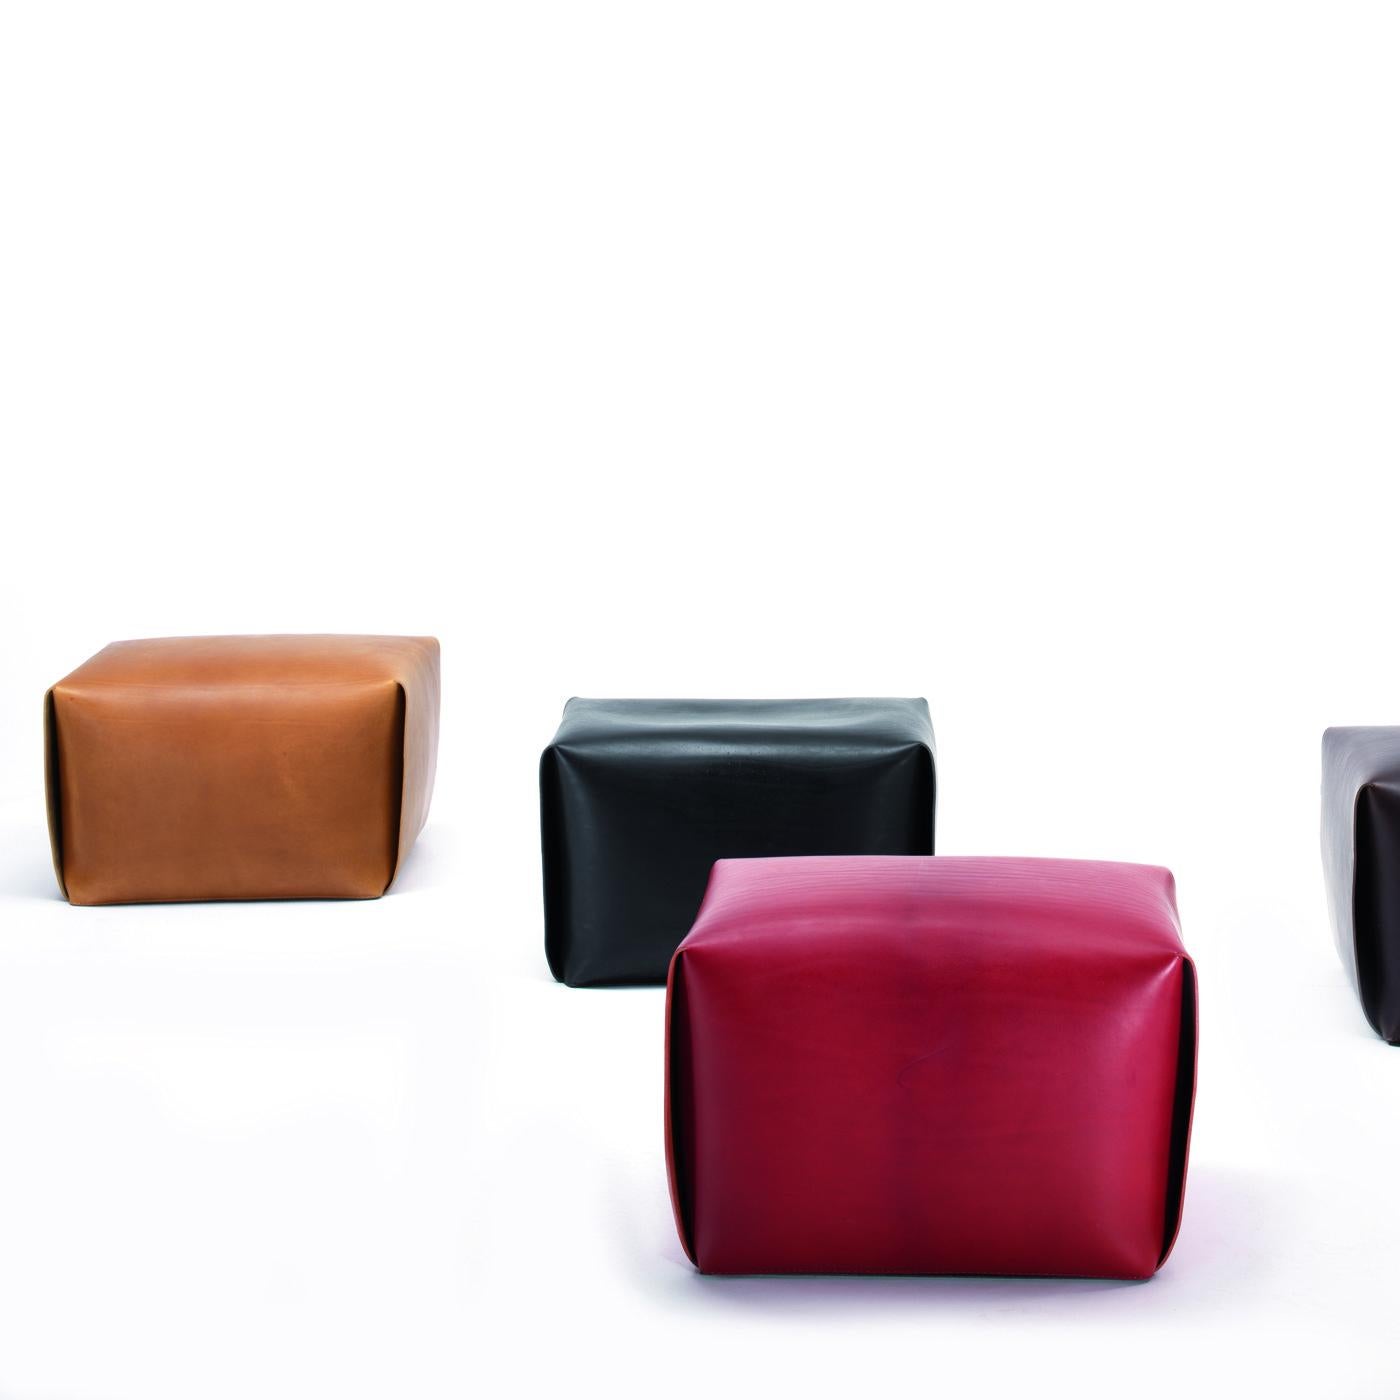 Borrowing inspiration from origami art, this splendid ottoman combines functional and aesthetic qualities, balancing the angularity of its silhouette with the soft quality of the leather. The rectangular wooden frame, containing high-density